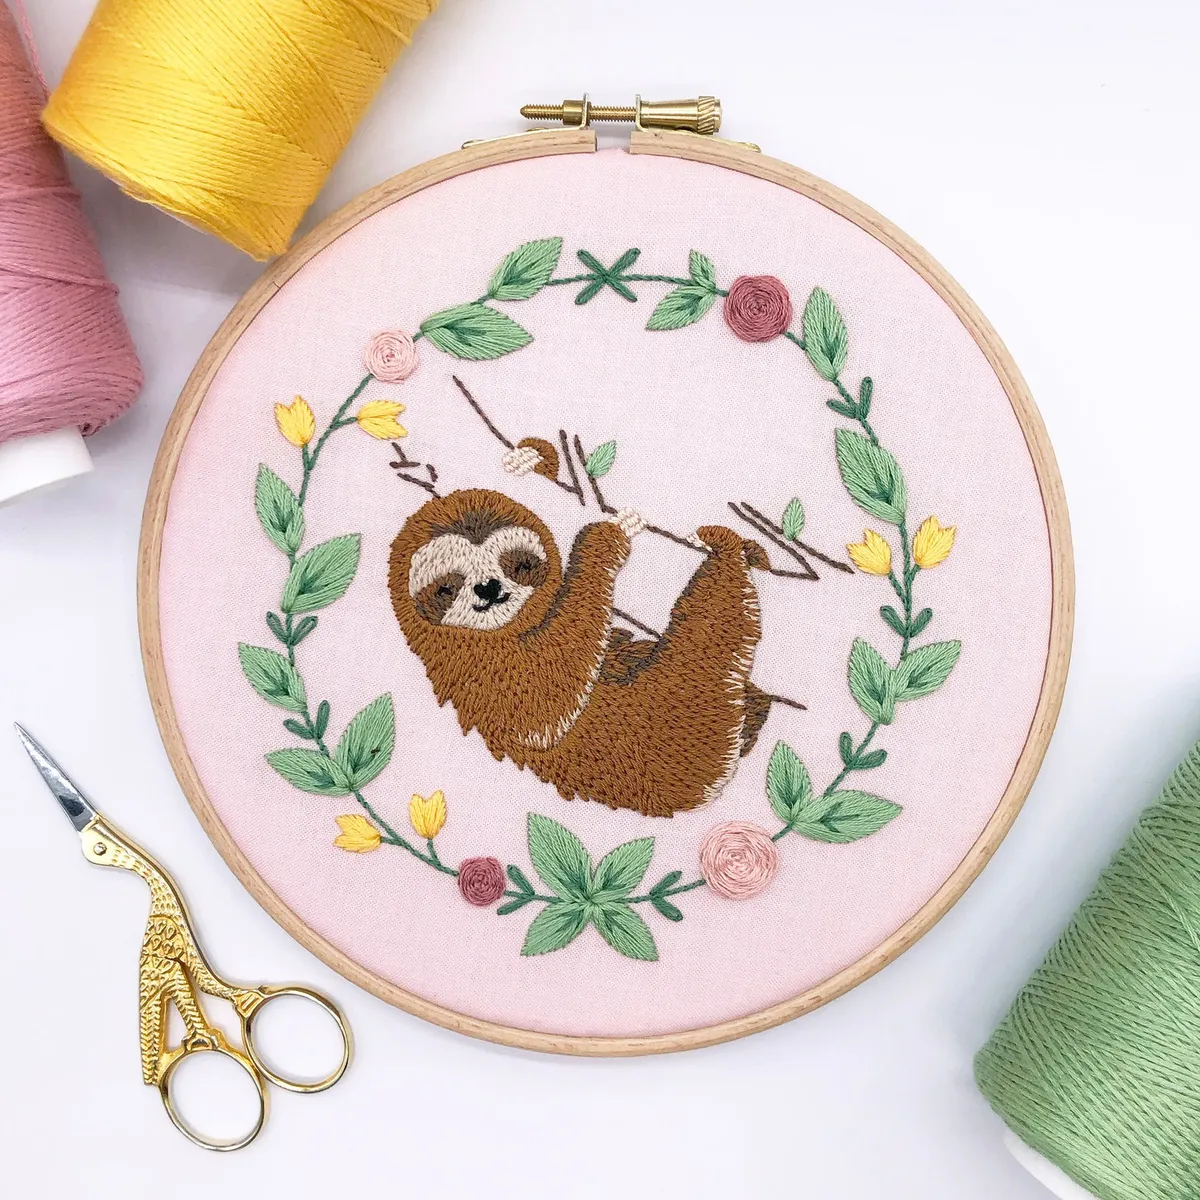 Embroidery Kits, Best Embroidery Kits for Beginner, Embroidery Kits store